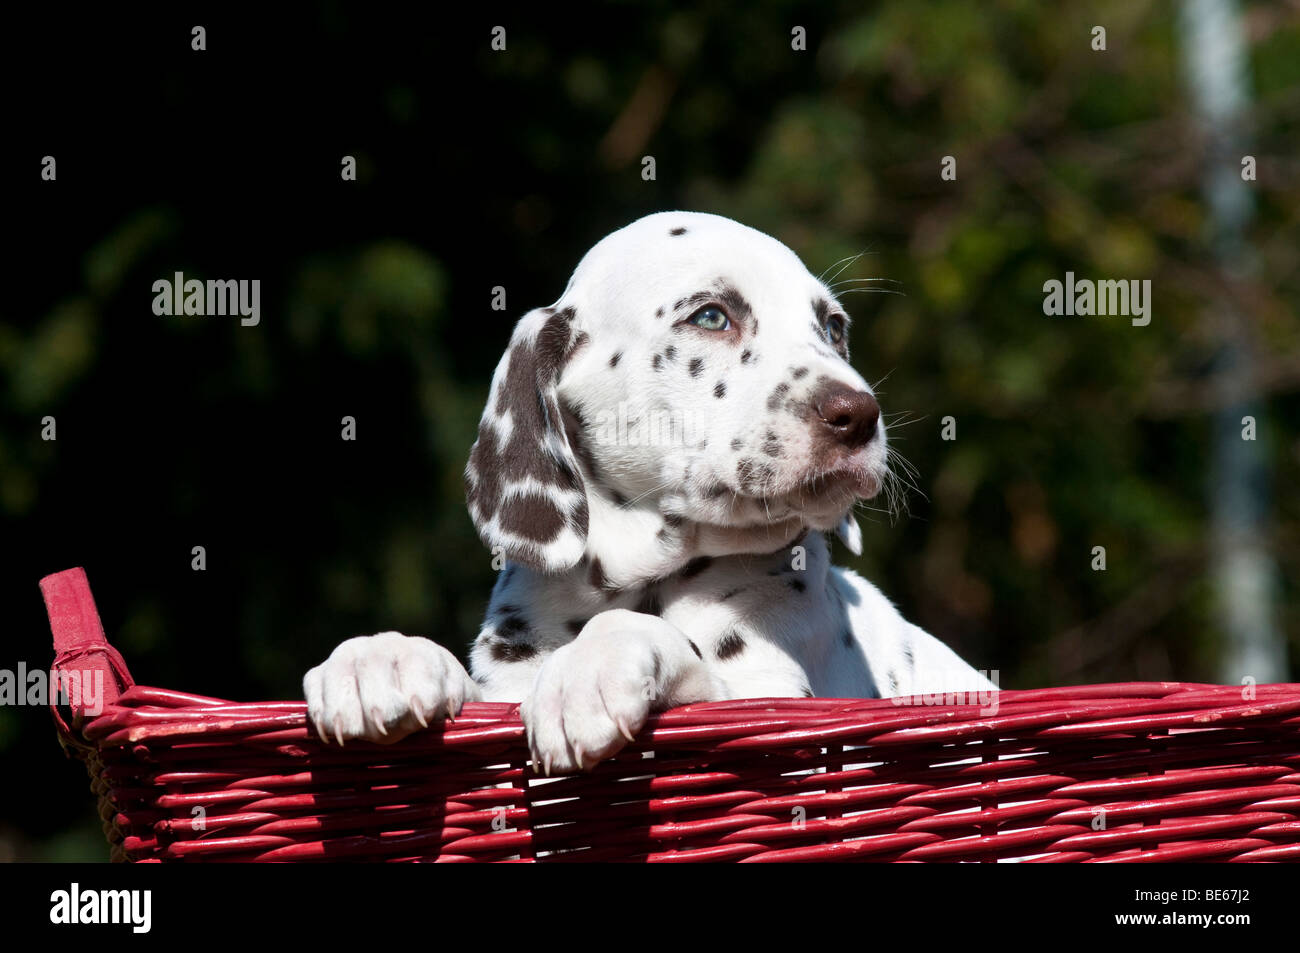 Young Dalmatian sitting in a wicker basket Stock Photo